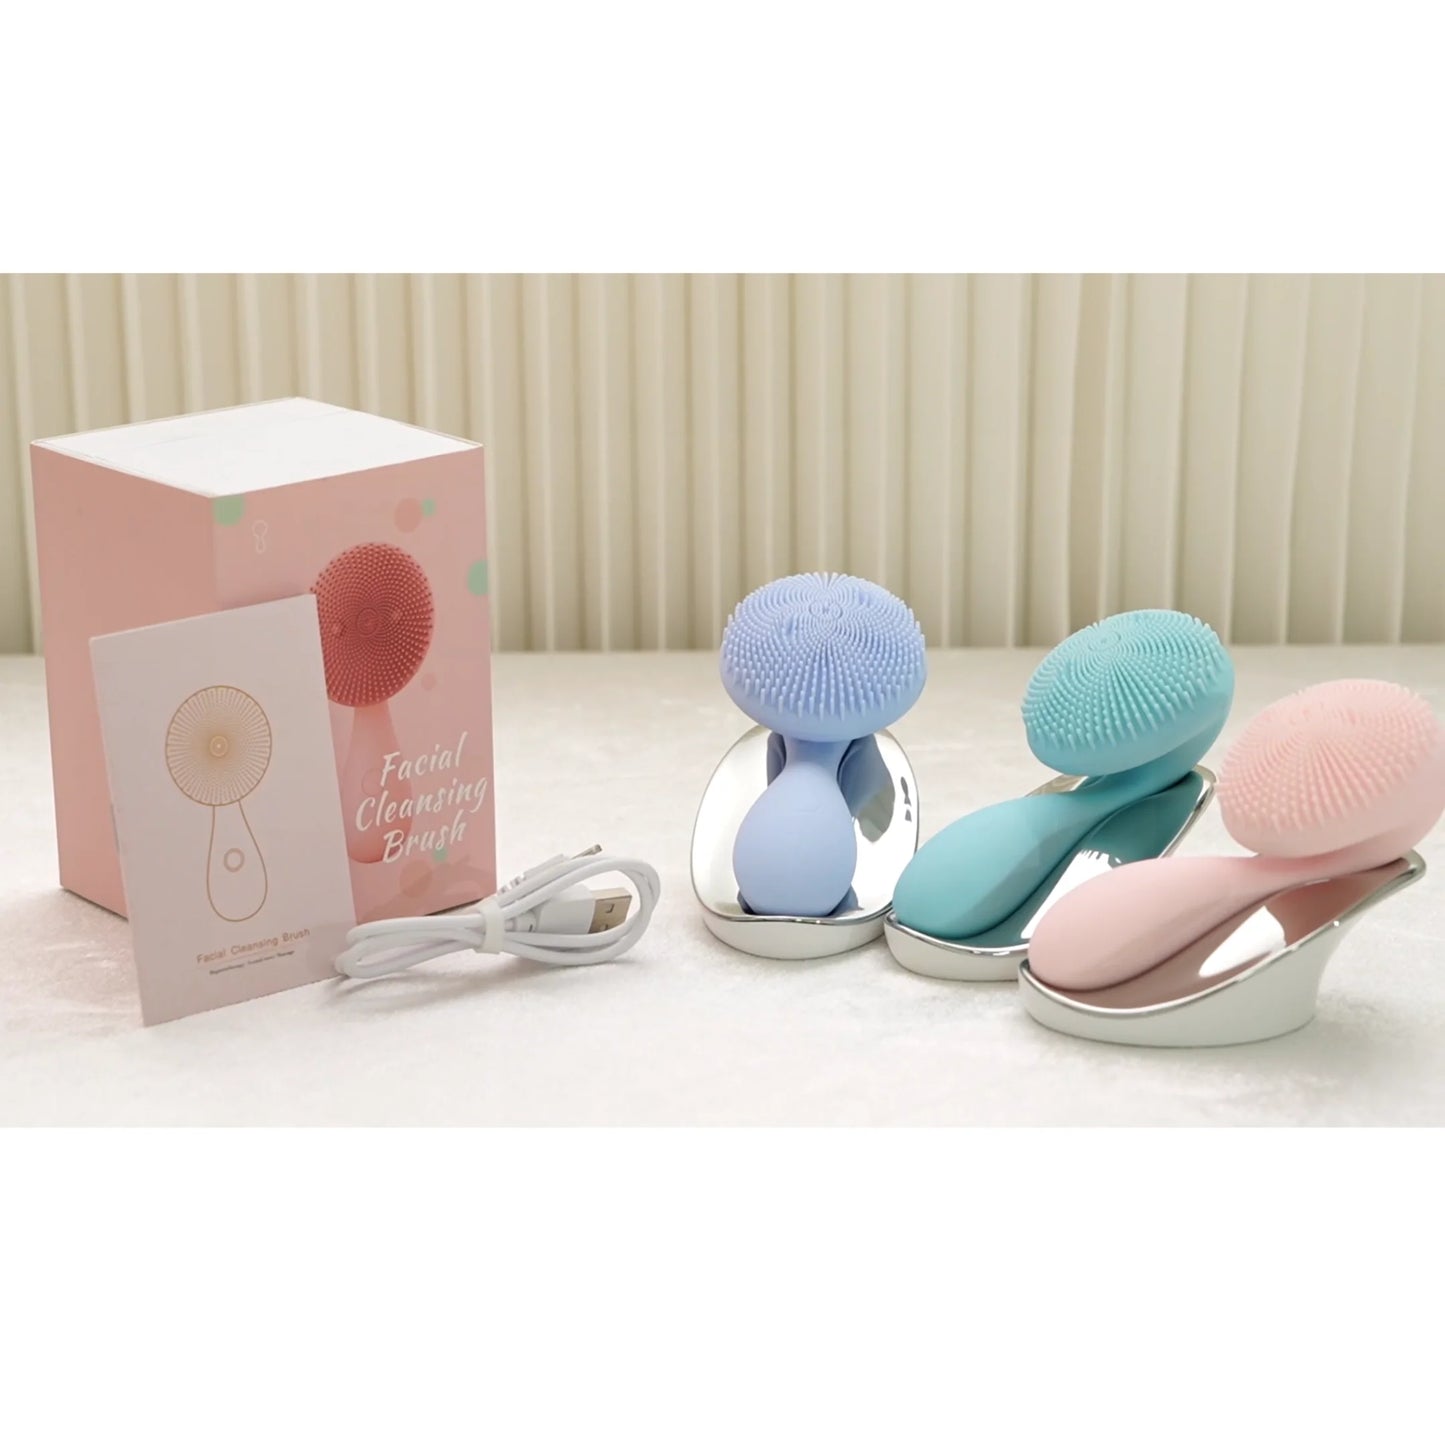 USB Vibration Massage Rechargeable Lithium Battery Silicone Face Brush Facial Cleansing Sonic Skin Scrubber Face Brush Cleaner